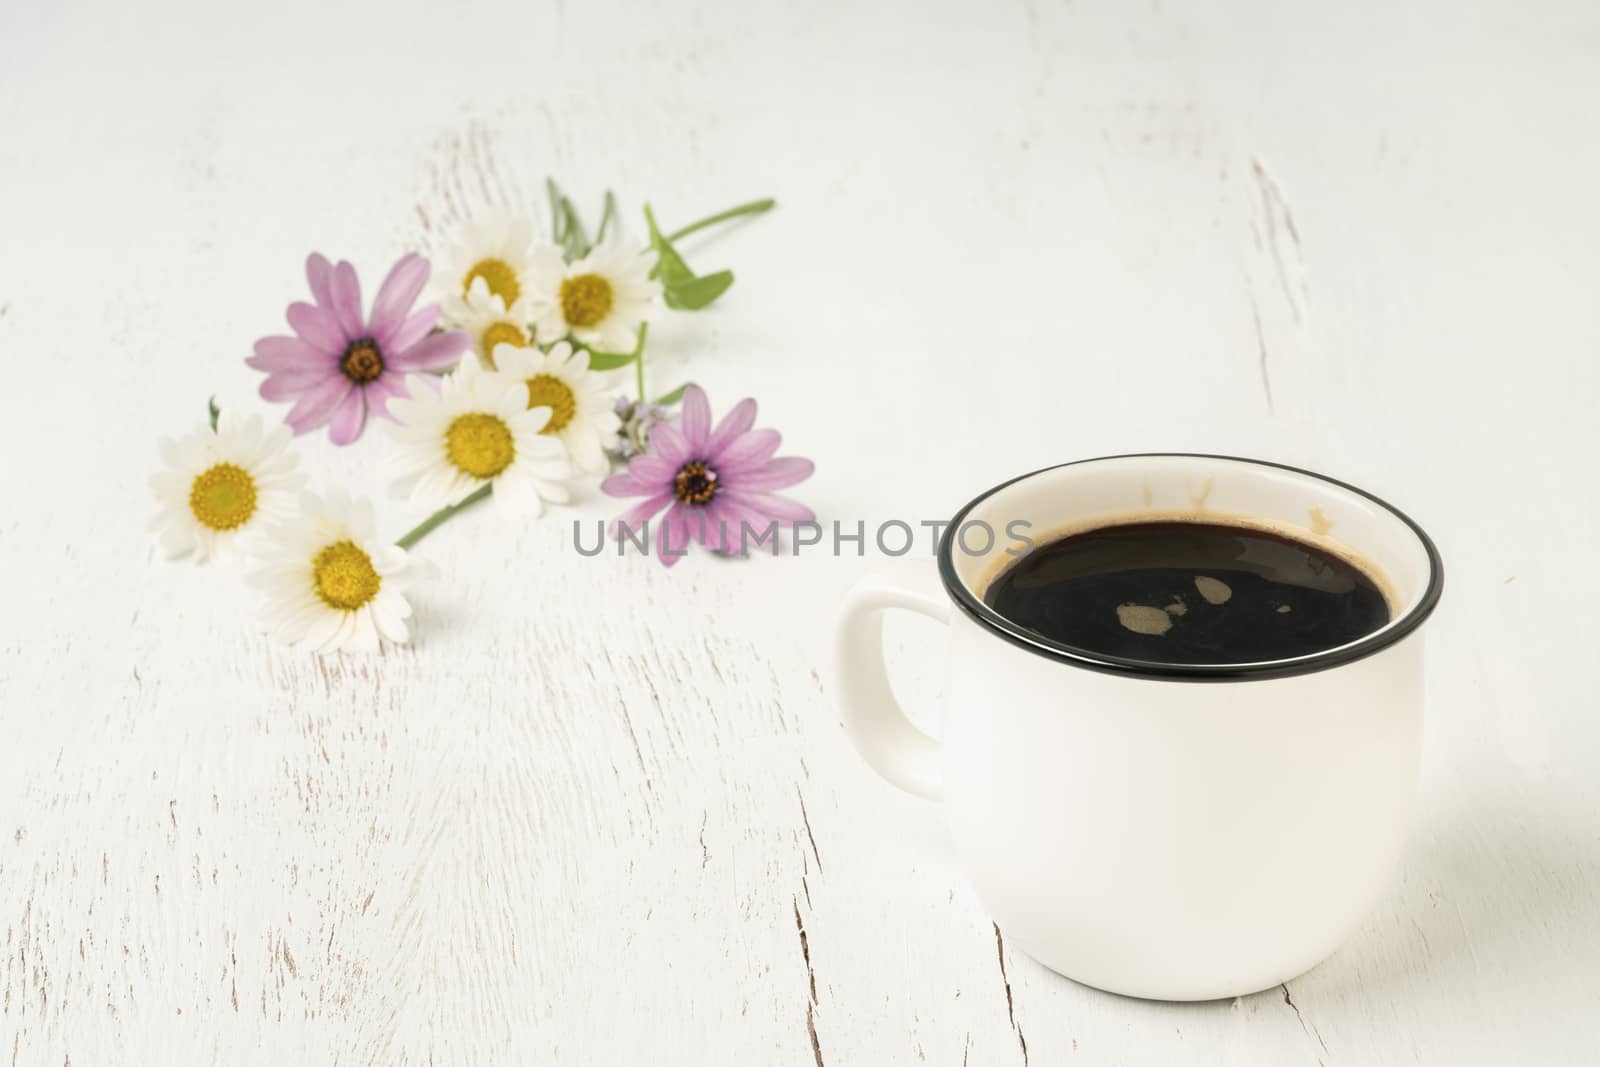 A cup of Americano coffee on a wooden table decorated with spring flowers